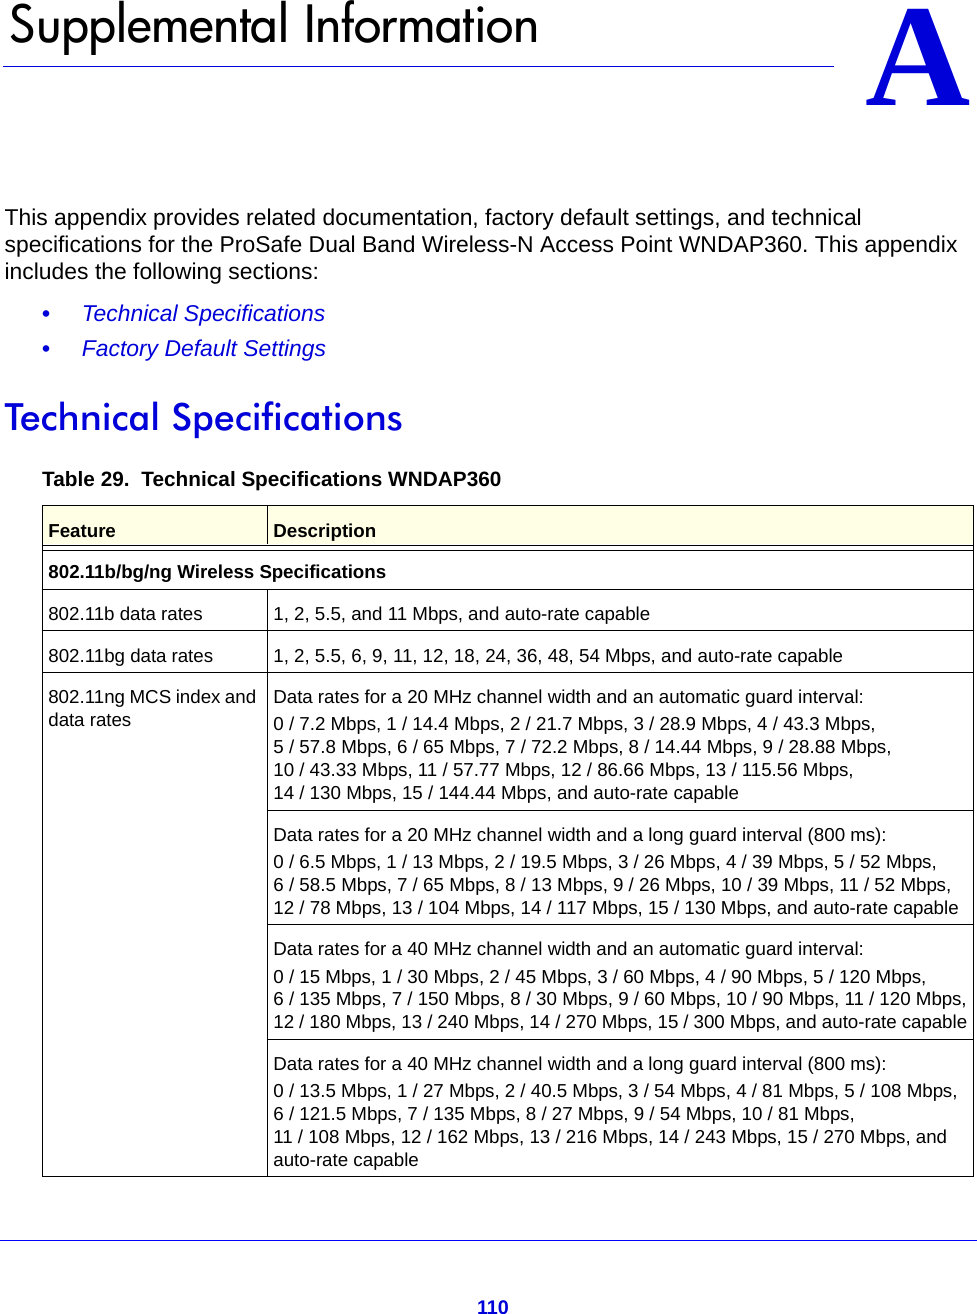 110AA.   Supplemental InformationThis appendix provides related documentation, factory default settings, and technical specifications for the ProSafe Dual Band Wireless-N Access Point WNDAP360. This appendix includes the following sections:•     Technical Specifications •     Factory Default Settings Technical SpecificationsTable 29.  Technical Specifications WNDAP360 Feature Description802.11b/bg/ng Wireless Specifications802.11b data rates 1, 2, 5.5, and 11 Mbps, and auto-rate capable802.11bg data rates 1, 2, 5.5, 6, 9, 11, 12, 18, 24, 36, 48, 54 Mbps, and auto-rate capable802.11ng MCS index and data ratesData rates for a 20 MHz channel width and an automatic guard interval:0 / 7.2 Mbps, 1 / 14.4 Mbps, 2 / 21.7 Mbps, 3 / 28.9 Mbps, 4 / 43.3 Mbps, 5 / 57.8 Mbps, 6 / 65 Mbps, 7 / 72.2 Mbps, 8 / 14.44 Mbps, 9 / 28.88 Mbps, 10 / 43.33 Mbps, 11 / 57.77 Mbps, 12 / 86.66 Mbps, 13 / 115.56 Mbps,  14 / 130 Mbps, 15 / 144.44 Mbps, and auto-rate capableData rates for a 20 MHz channel width and a long guard interval (800 ms):0 / 6.5 Mbps, 1 / 13 Mbps, 2 / 19.5 Mbps, 3 / 26 Mbps, 4 / 39 Mbps, 5 / 52 Mbps, 6 / 58.5 Mbps, 7 / 65 Mbps, 8 / 13 Mbps, 9 / 26 Mbps, 10 / 39 Mbps, 11 / 52 Mbps, 12 / 78 Mbps, 13 / 104 Mbps, 14 / 117 Mbps, 15 / 130 Mbps, and auto-rate capableData rates for a 40 MHz channel width and an automatic guard interval:0 / 15 Mbps, 1 / 30 Mbps, 2 / 45 Mbps, 3 / 60 Mbps, 4 / 90 Mbps, 5 / 120 Mbps, 6 / 135 Mbps, 7 / 150 Mbps, 8 / 30 Mbps, 9 / 60 Mbps, 10 / 90 Mbps, 11 / 120 Mbps, 12 / 180 Mbps, 13 / 240 Mbps, 14 / 270 Mbps, 15 / 300 Mbps, and auto-rate capableData rates for a 40 MHz channel width and a long guard interval (800 ms):0 / 13.5 Mbps, 1 / 27 Mbps, 2 / 40.5 Mbps, 3 / 54 Mbps, 4 / 81 Mbps, 5 / 108 Mbps, 6 / 121.5 Mbps, 7 / 135 Mbps, 8 / 27 Mbps, 9 / 54 Mbps, 10 / 81 Mbps, 11 / 108 Mbps, 12 / 162 Mbps, 13 / 216 Mbps, 14 / 243 Mbps, 15 / 270 Mbps, and auto-rate capable